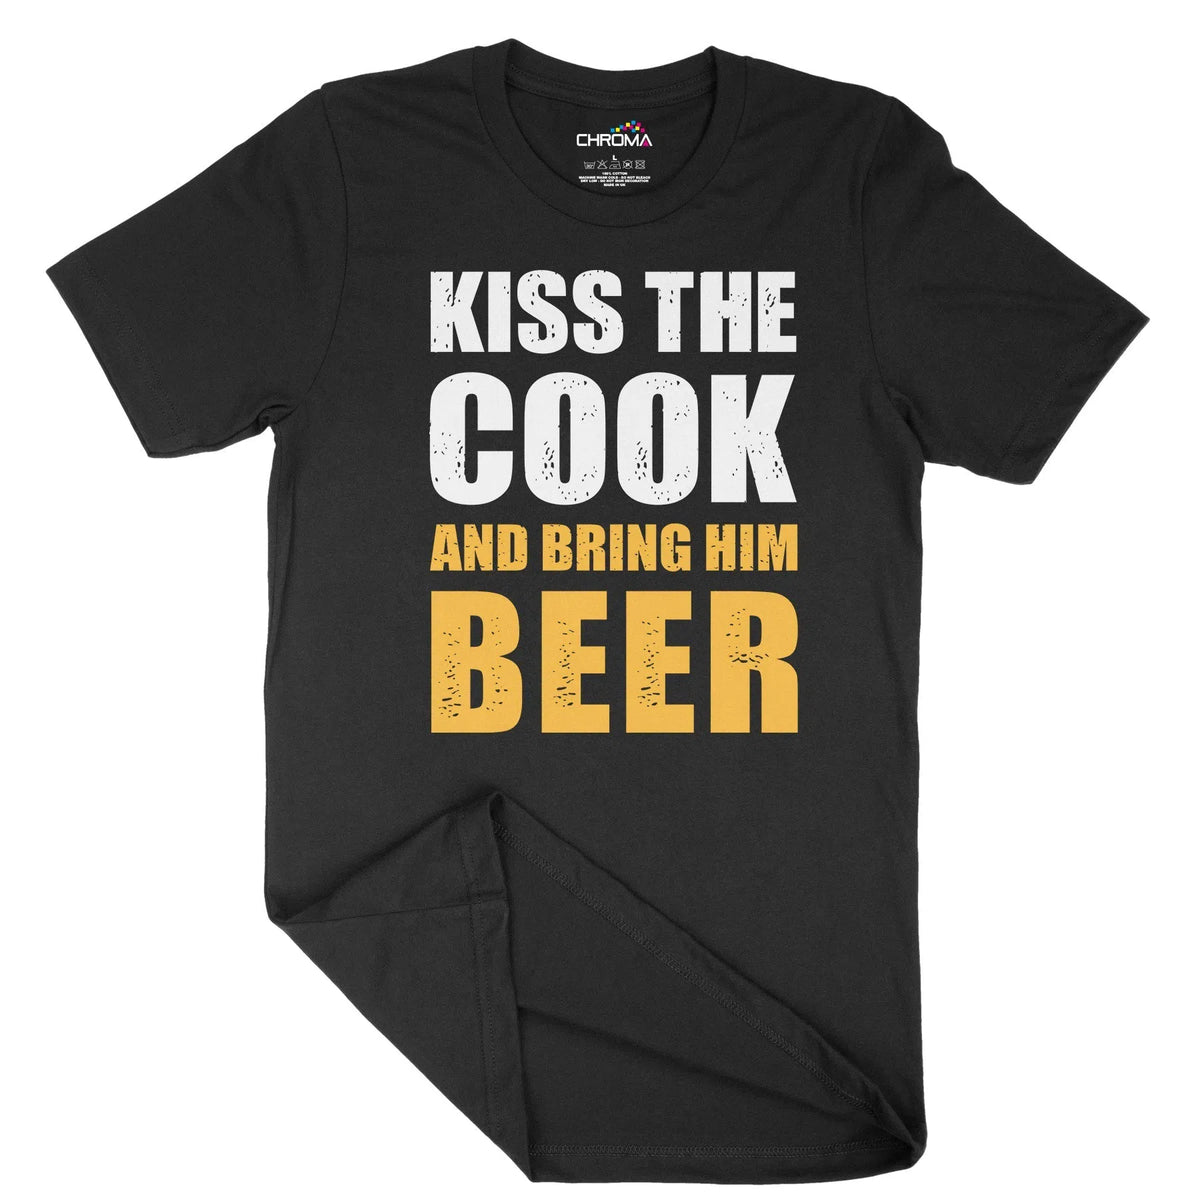 Kiss The Cook And Bring Him Beer Unisex Adult T-Shirt | Quality Slogan Chroma Clothing